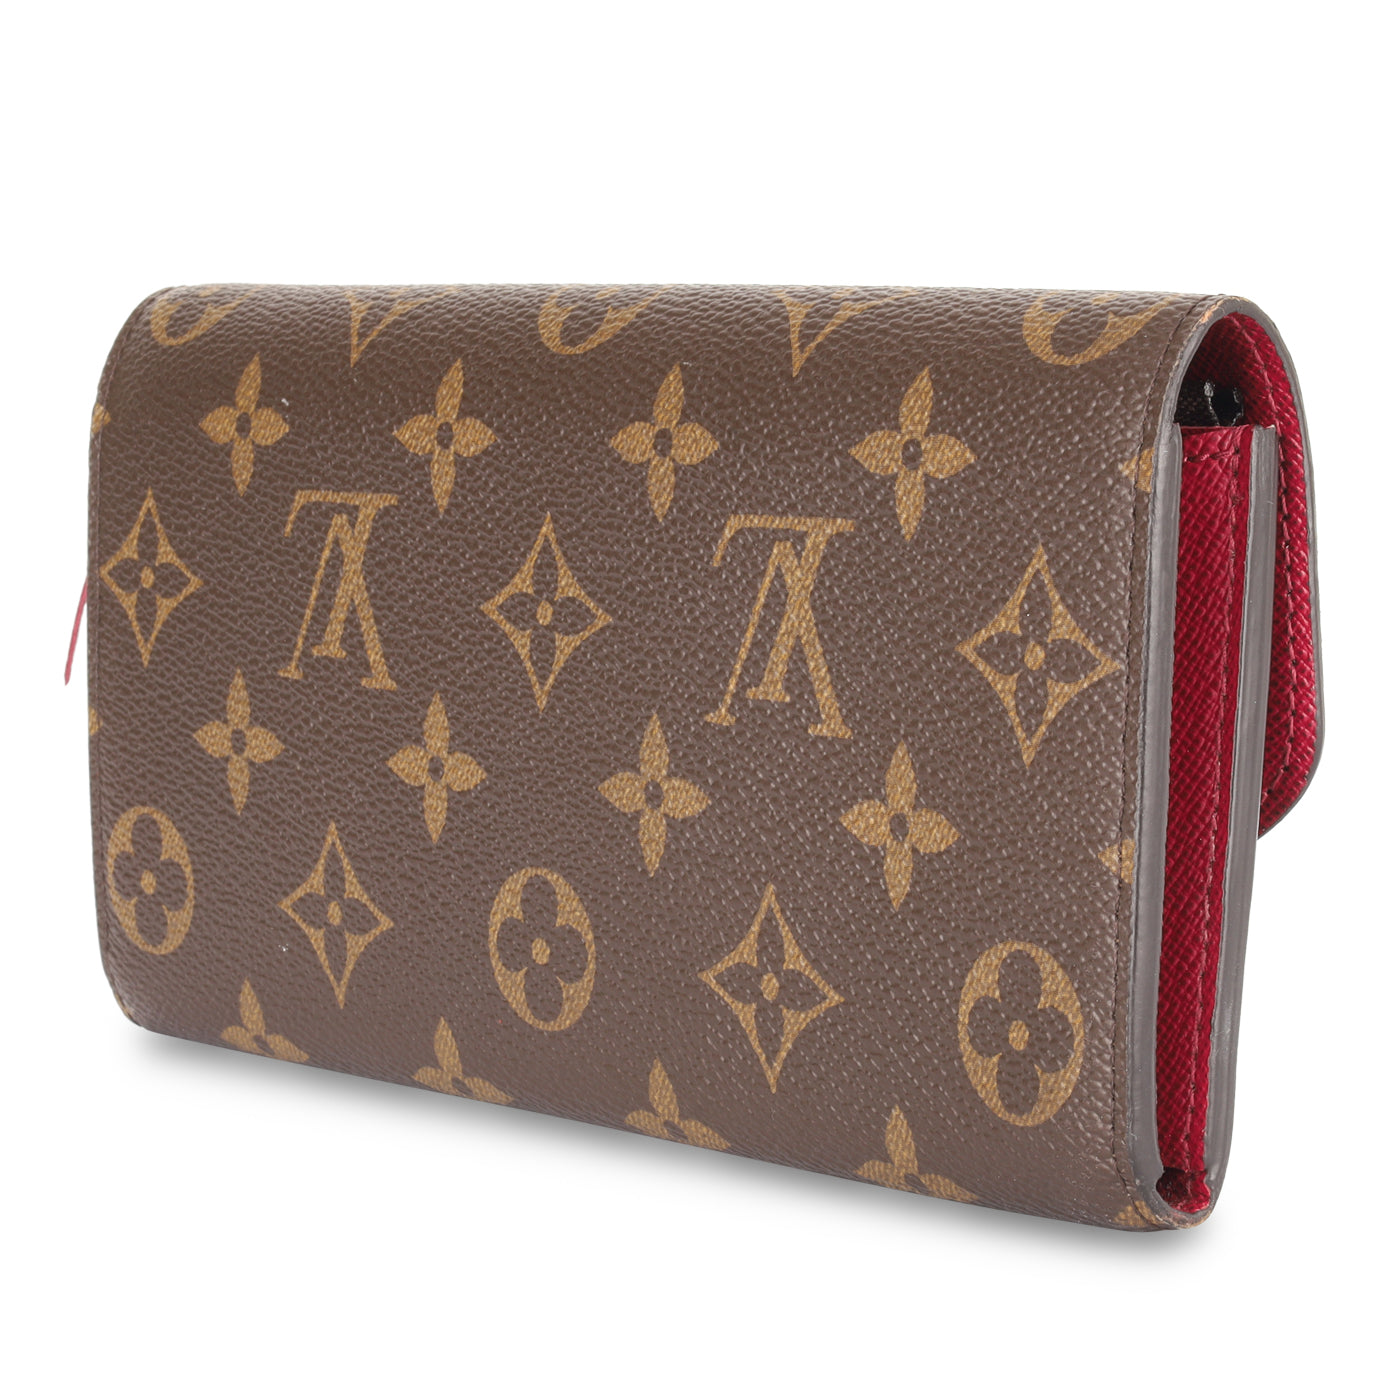 Emilie Wallet Monogram Canvas in WOMEN's SMALL LEATHER GOODS WALLETS  collections by Louis Vuitton